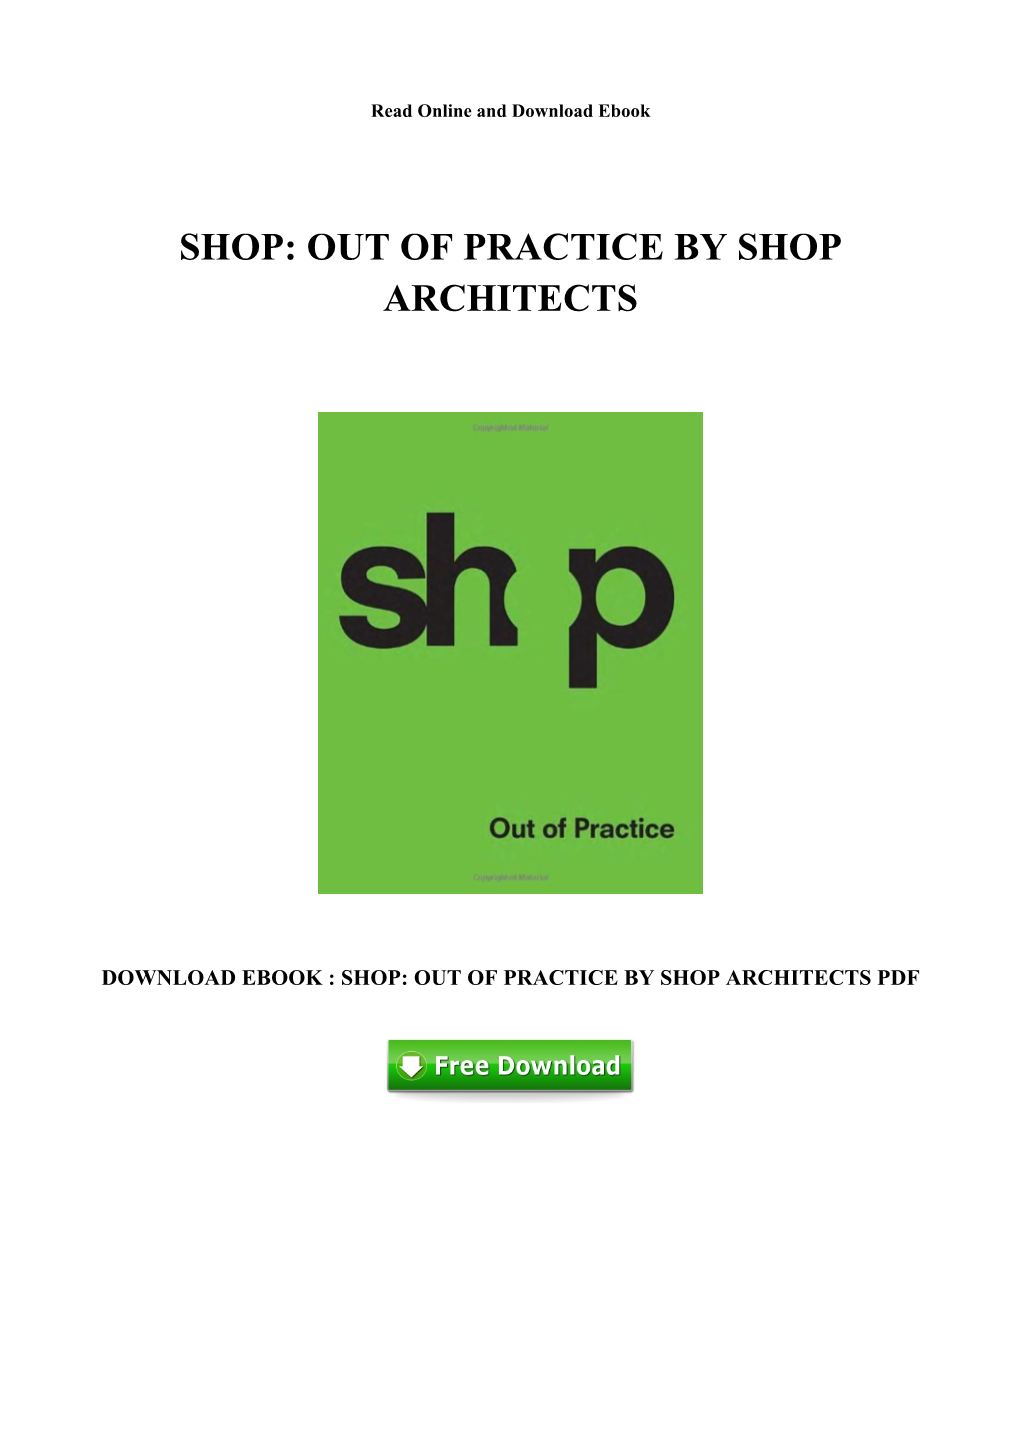 Download PDF Shop: out of Practice by Shop Architects